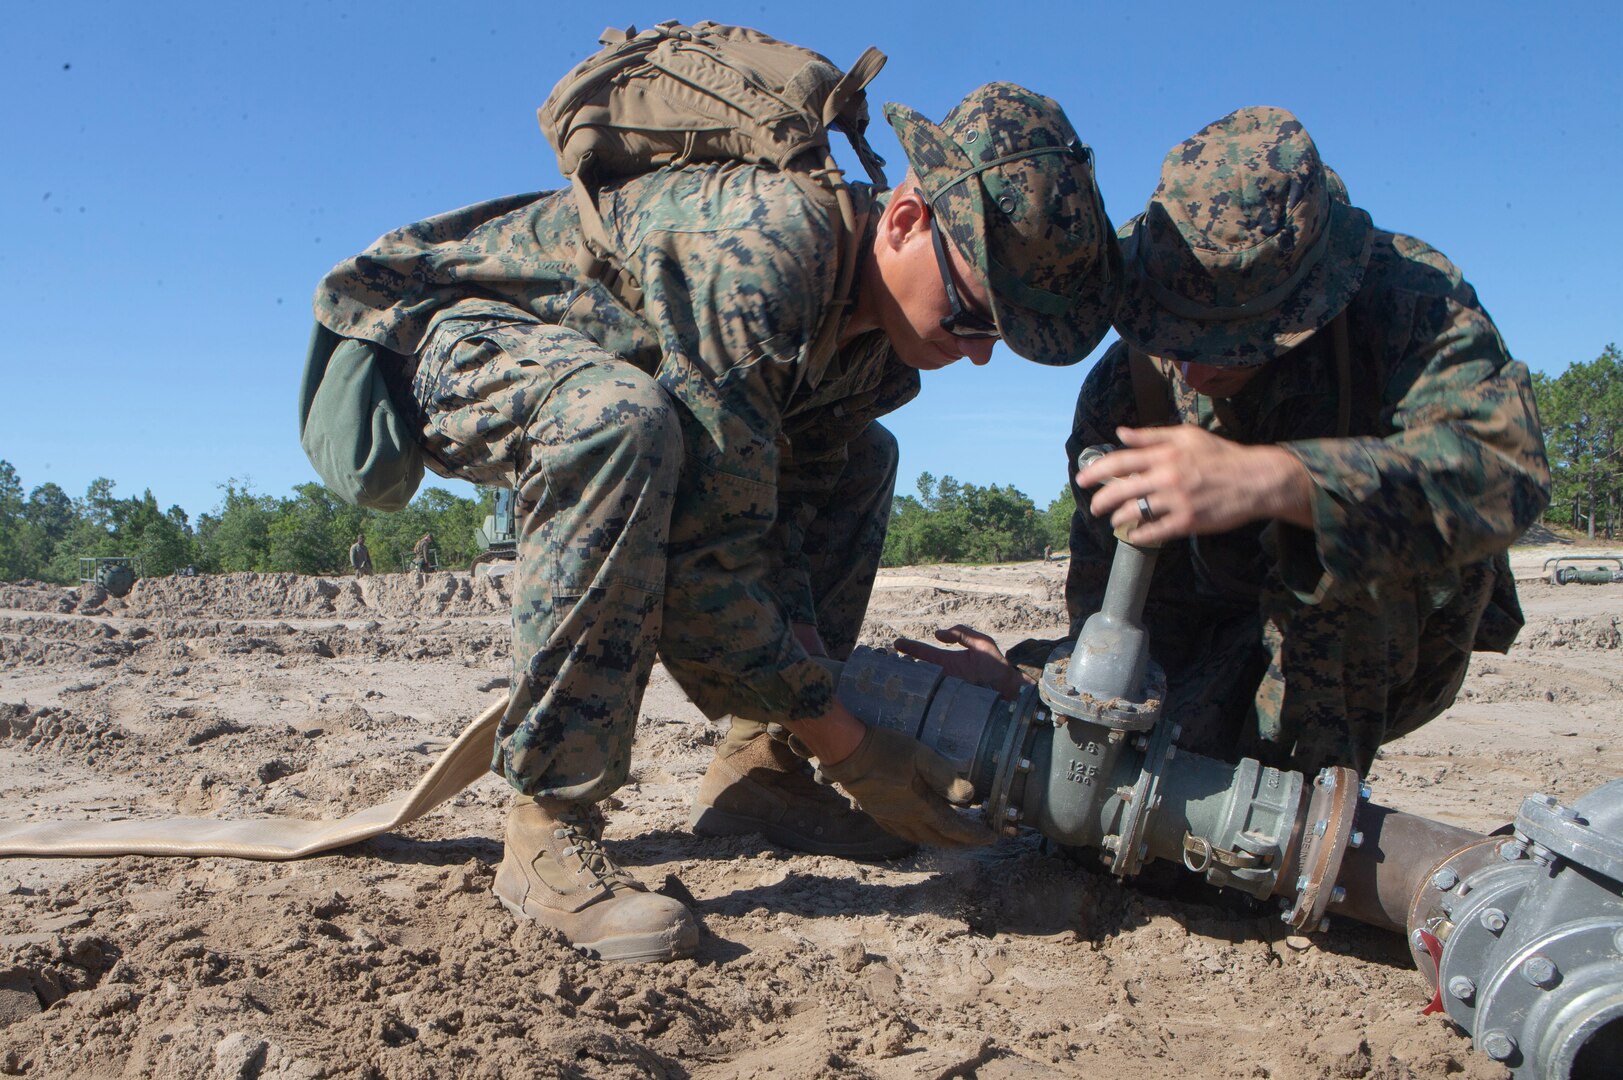 U.S. Marine Corps Lance Cpl. Gabriel Garska, (left) and Lance Cpl. Timothy Weaver, (right) with Bulk Fuel Company, 8th Engineer Support Battalion, 2nd Marine Logistics Group, attach a fuel hose to a gate valve during a Bulk Fuel exercise at Camp Lejeune, N.C., June 19, 2019. The Marines with 8th ESB ran fuel lines, patrolled the fuel sites and provided all around security to remain proficient in fueling support operations.  (U.S. Marine Corps photo by Lance Cpl. Adaezia L. Chavez)